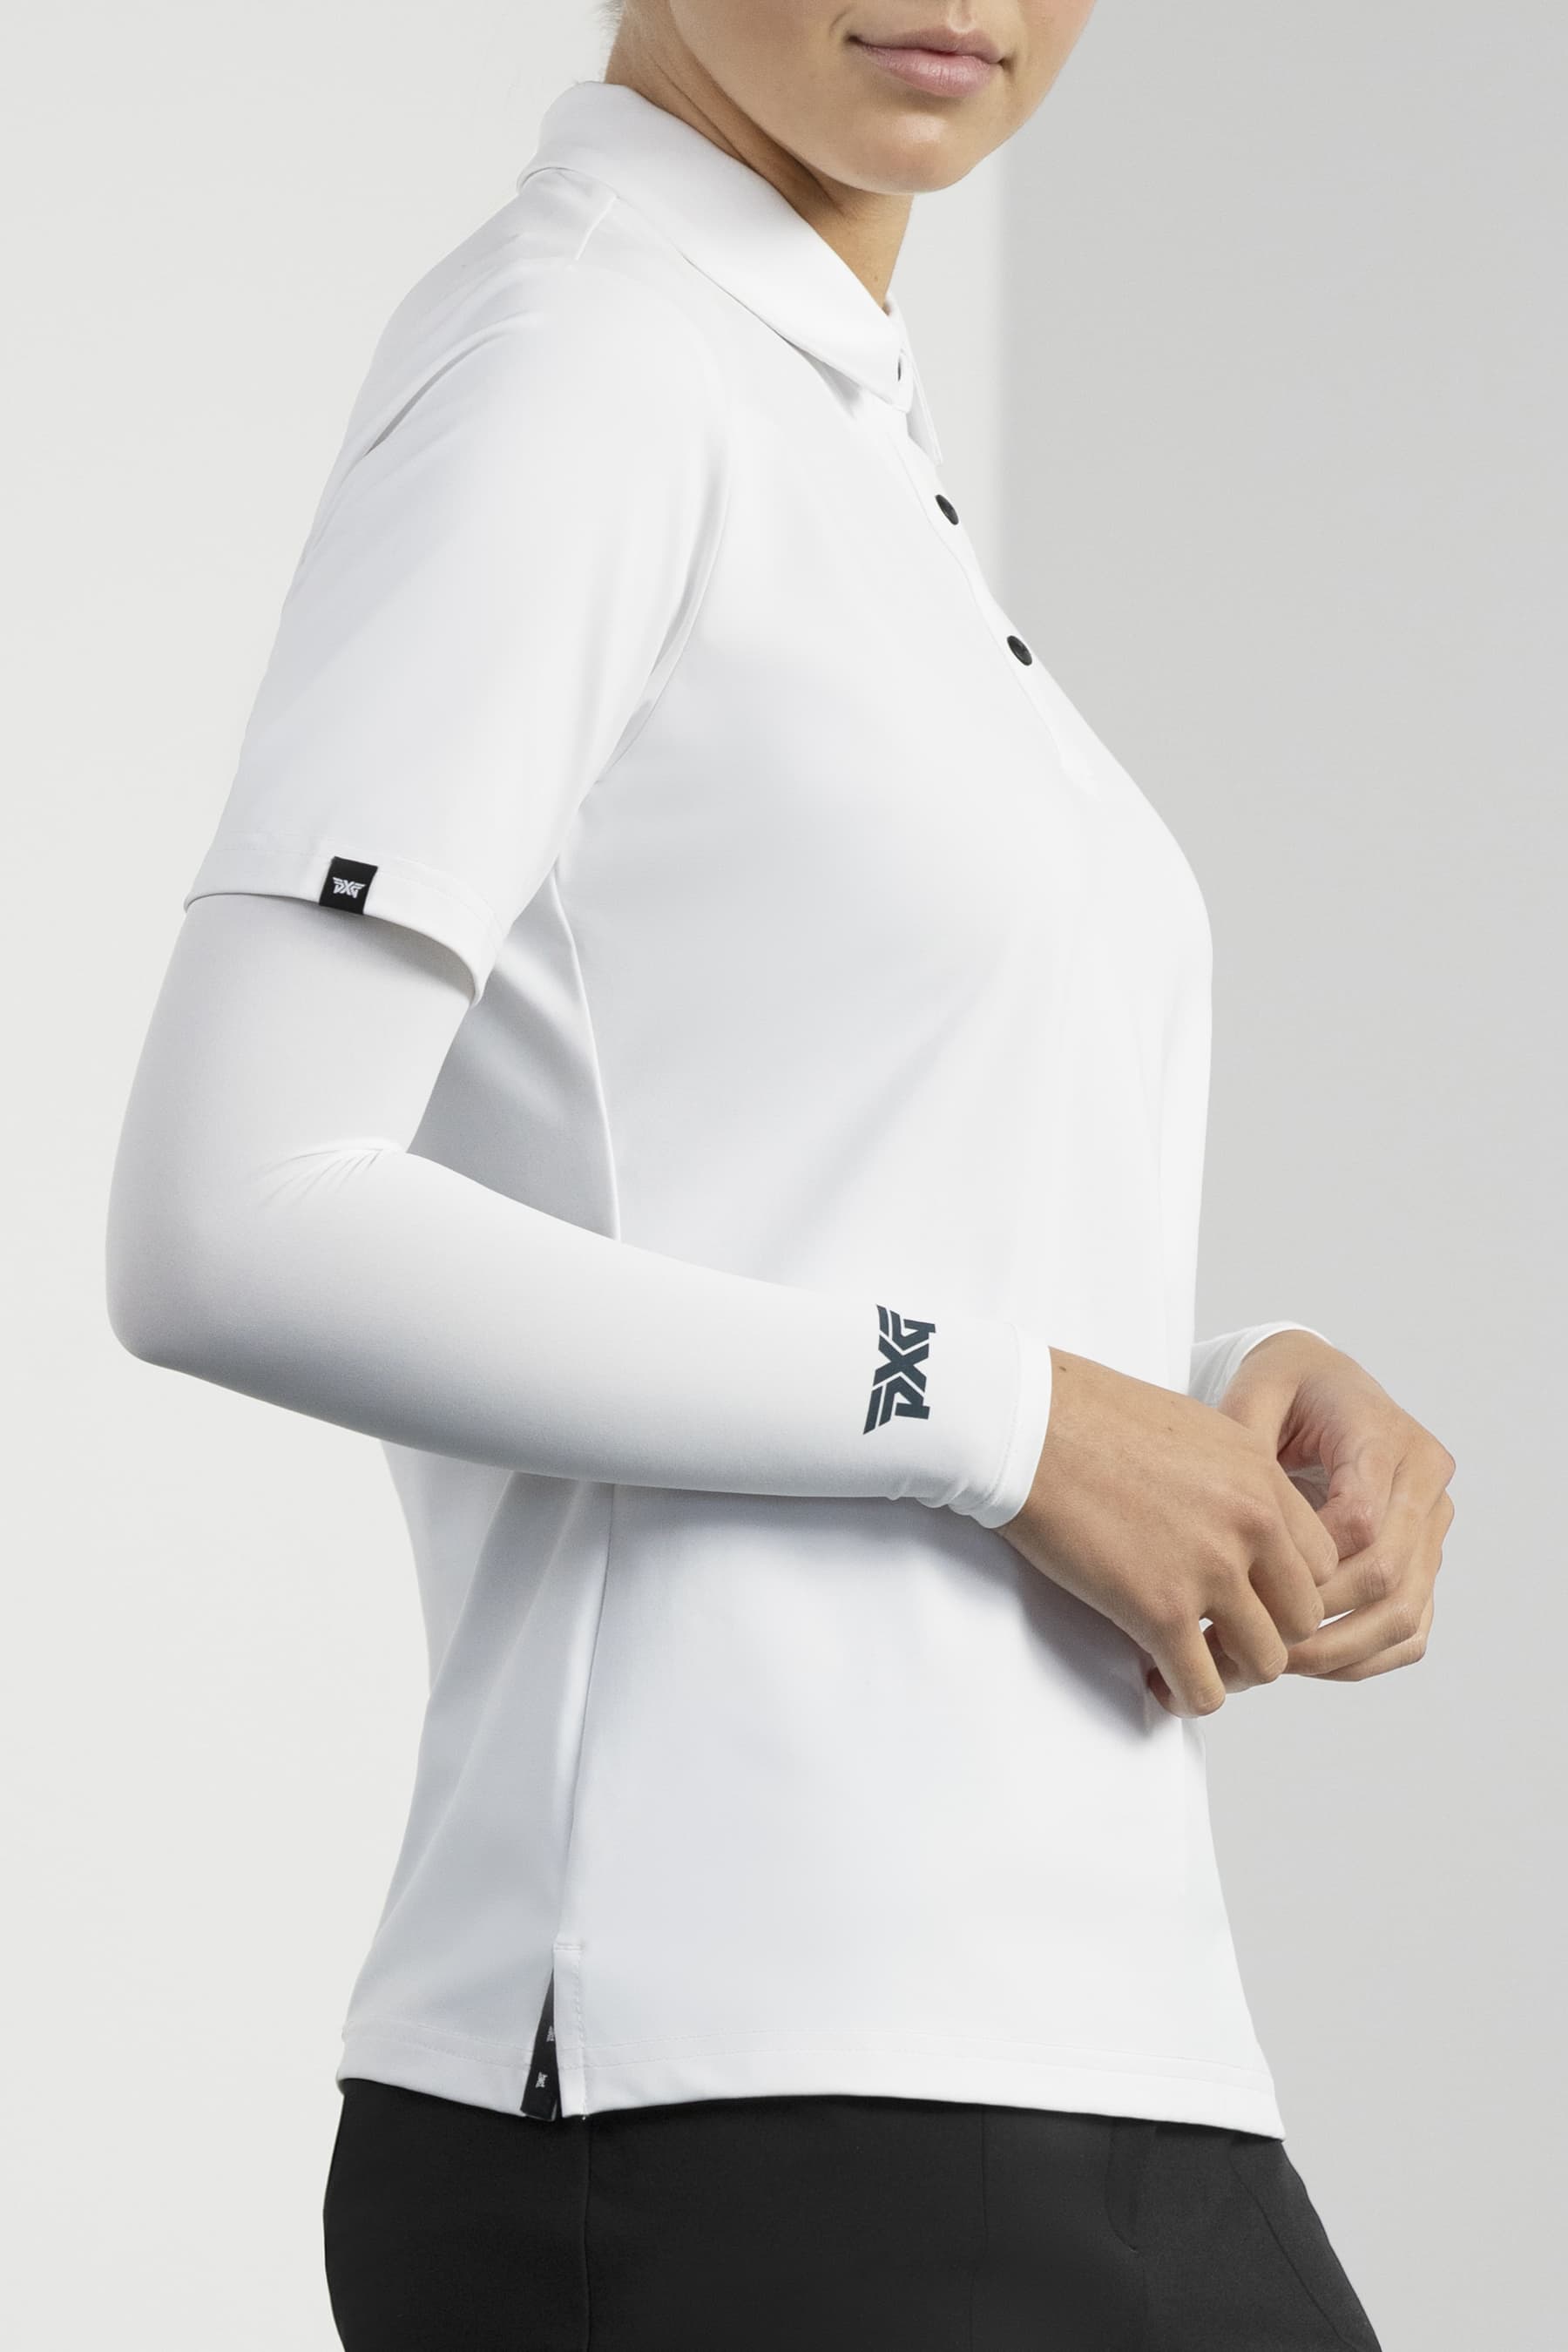 PXG X SParms Sun Protection Shoulder Wrap Unisex  Shop the Highest Quality  Golf Apparel, Gear, Accessories and Golf Clubs at PXG